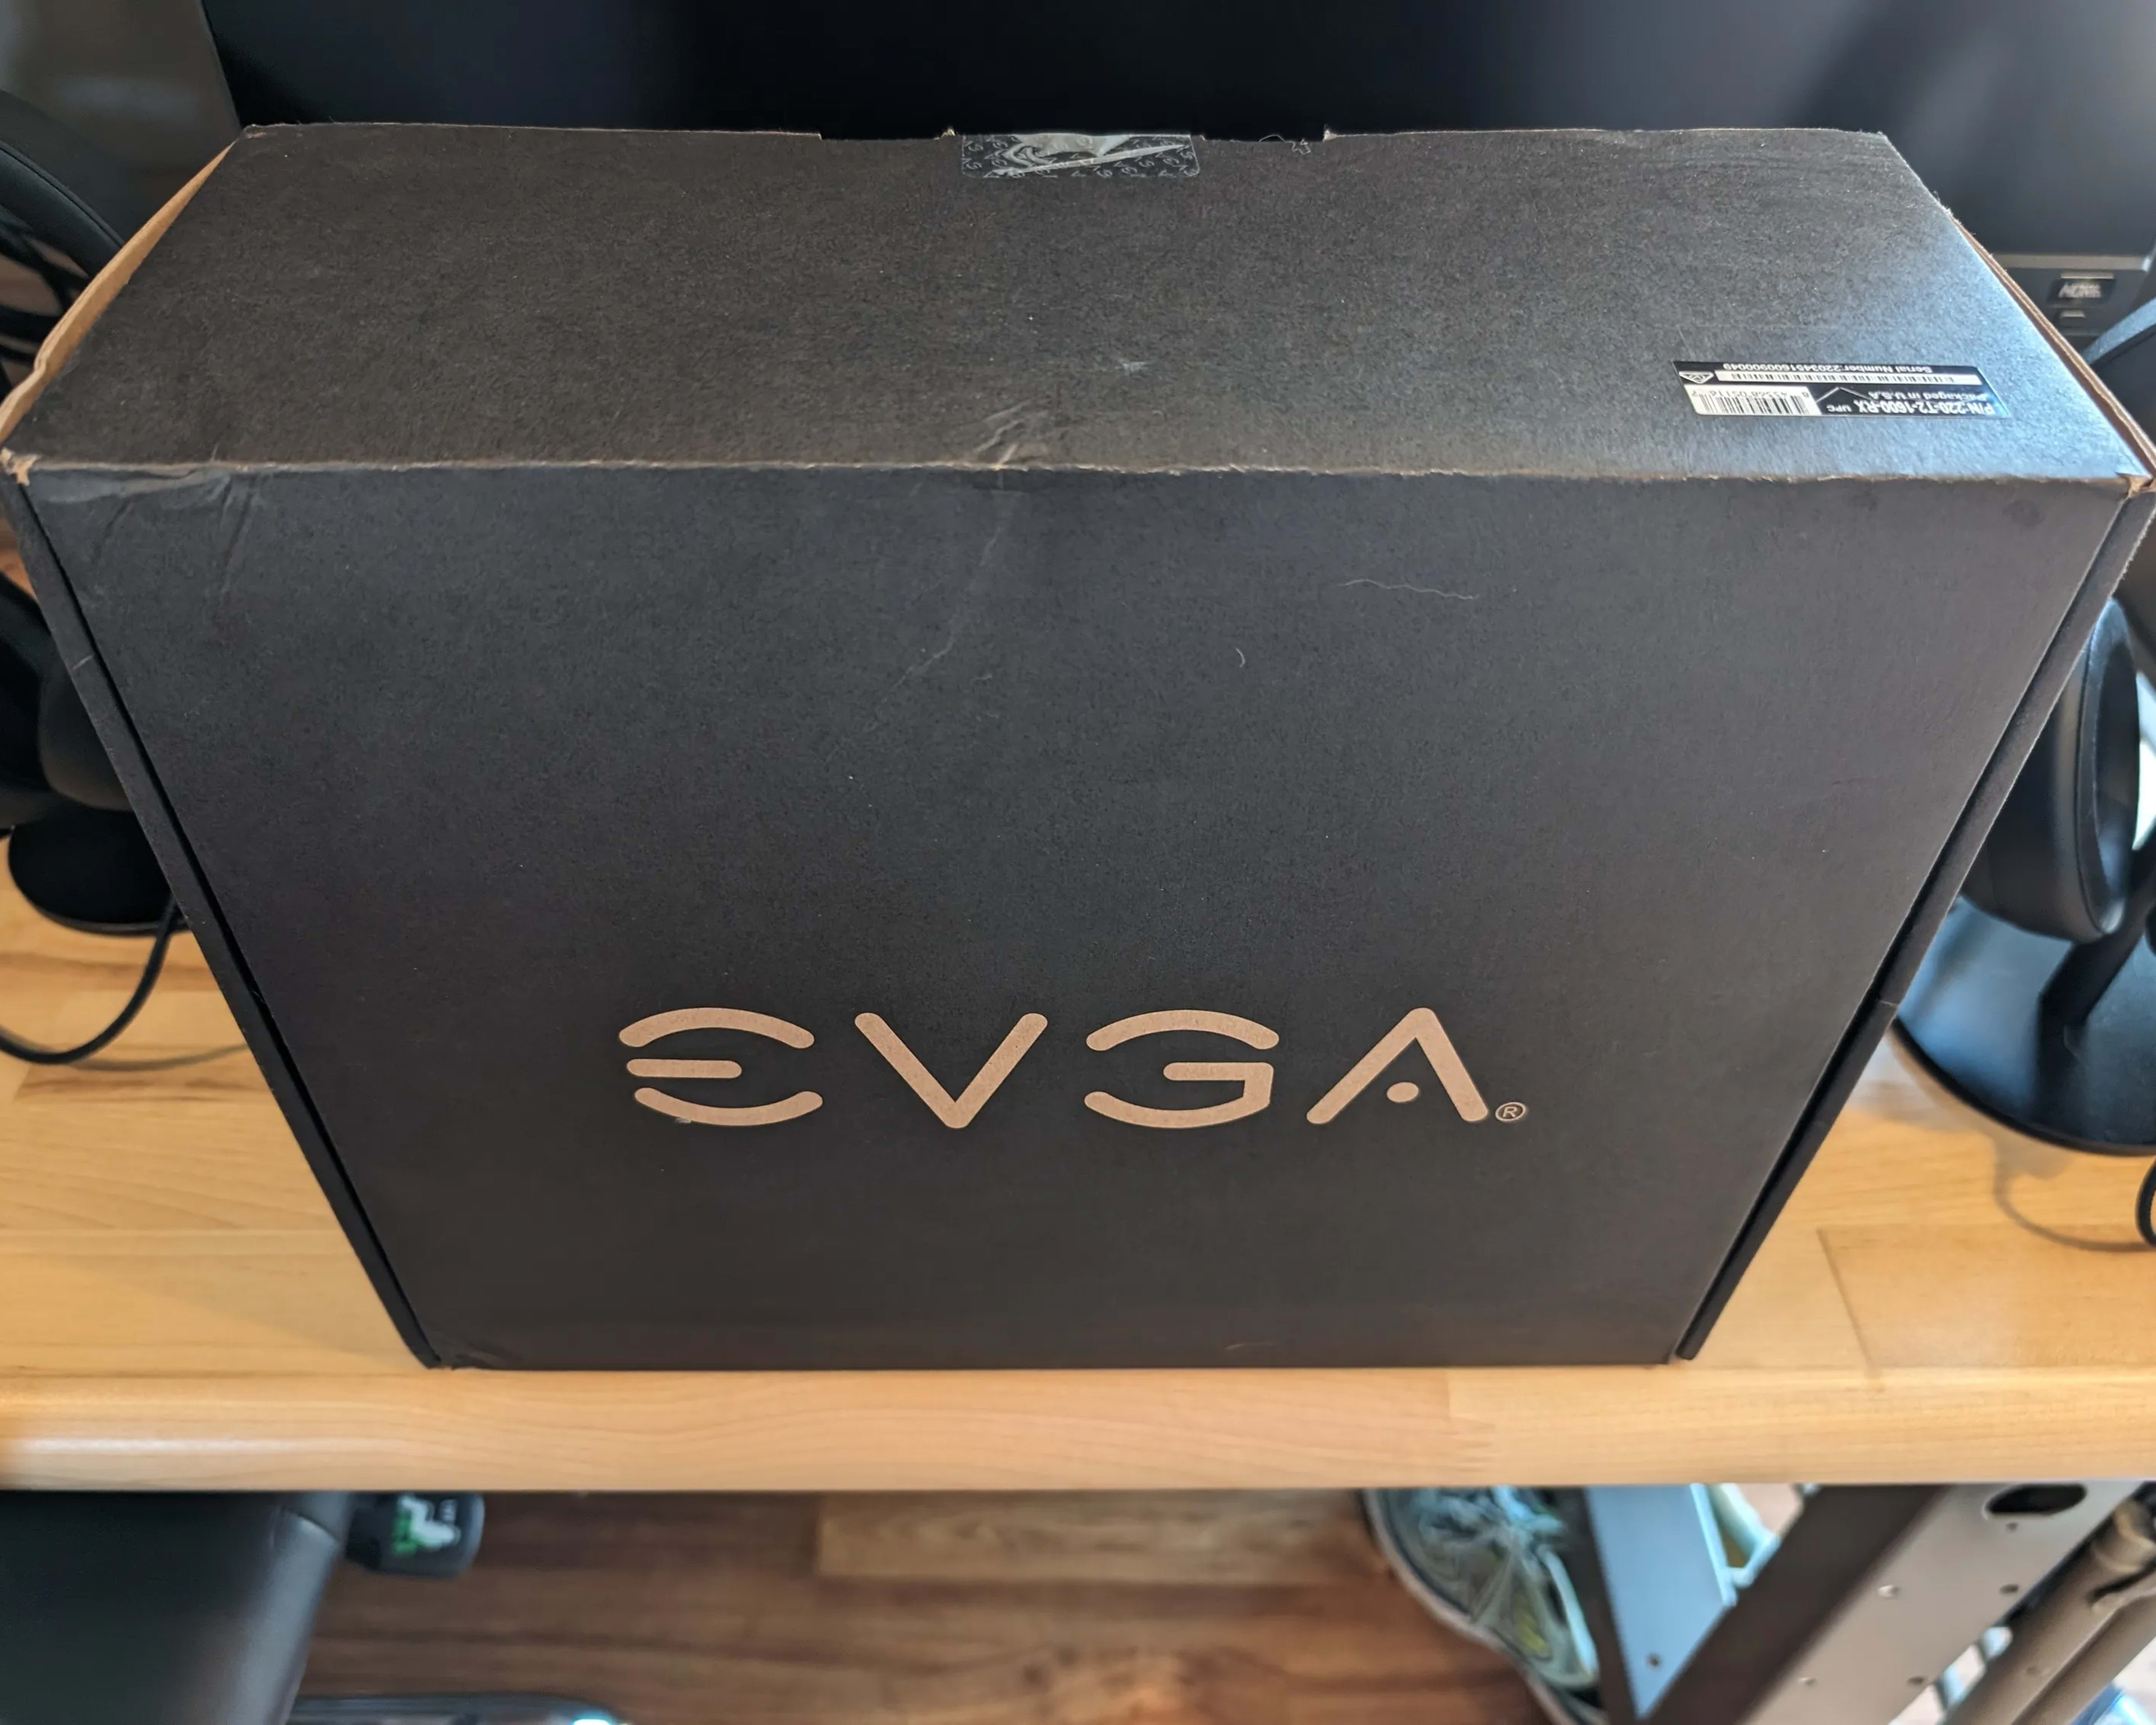 EVGA 1600W T2 (Titanium Certified) Power Supply - New B-Stock directly from EVGA